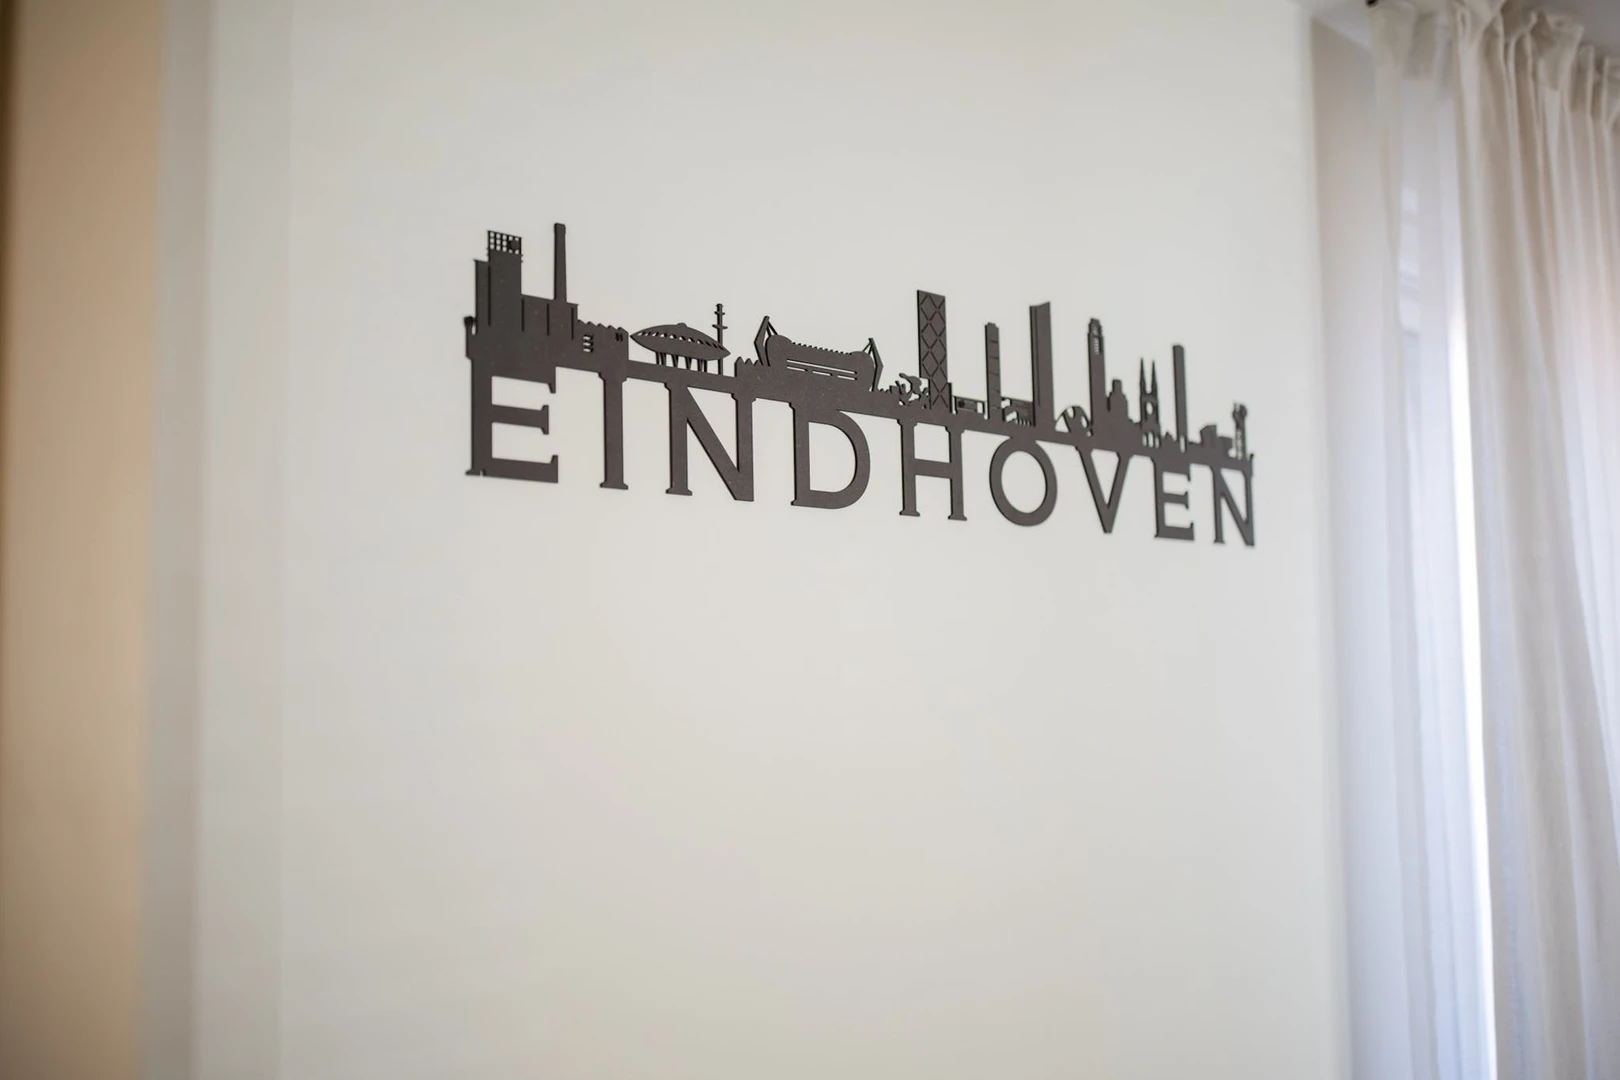 Accommodation in the centre of Eindhoven